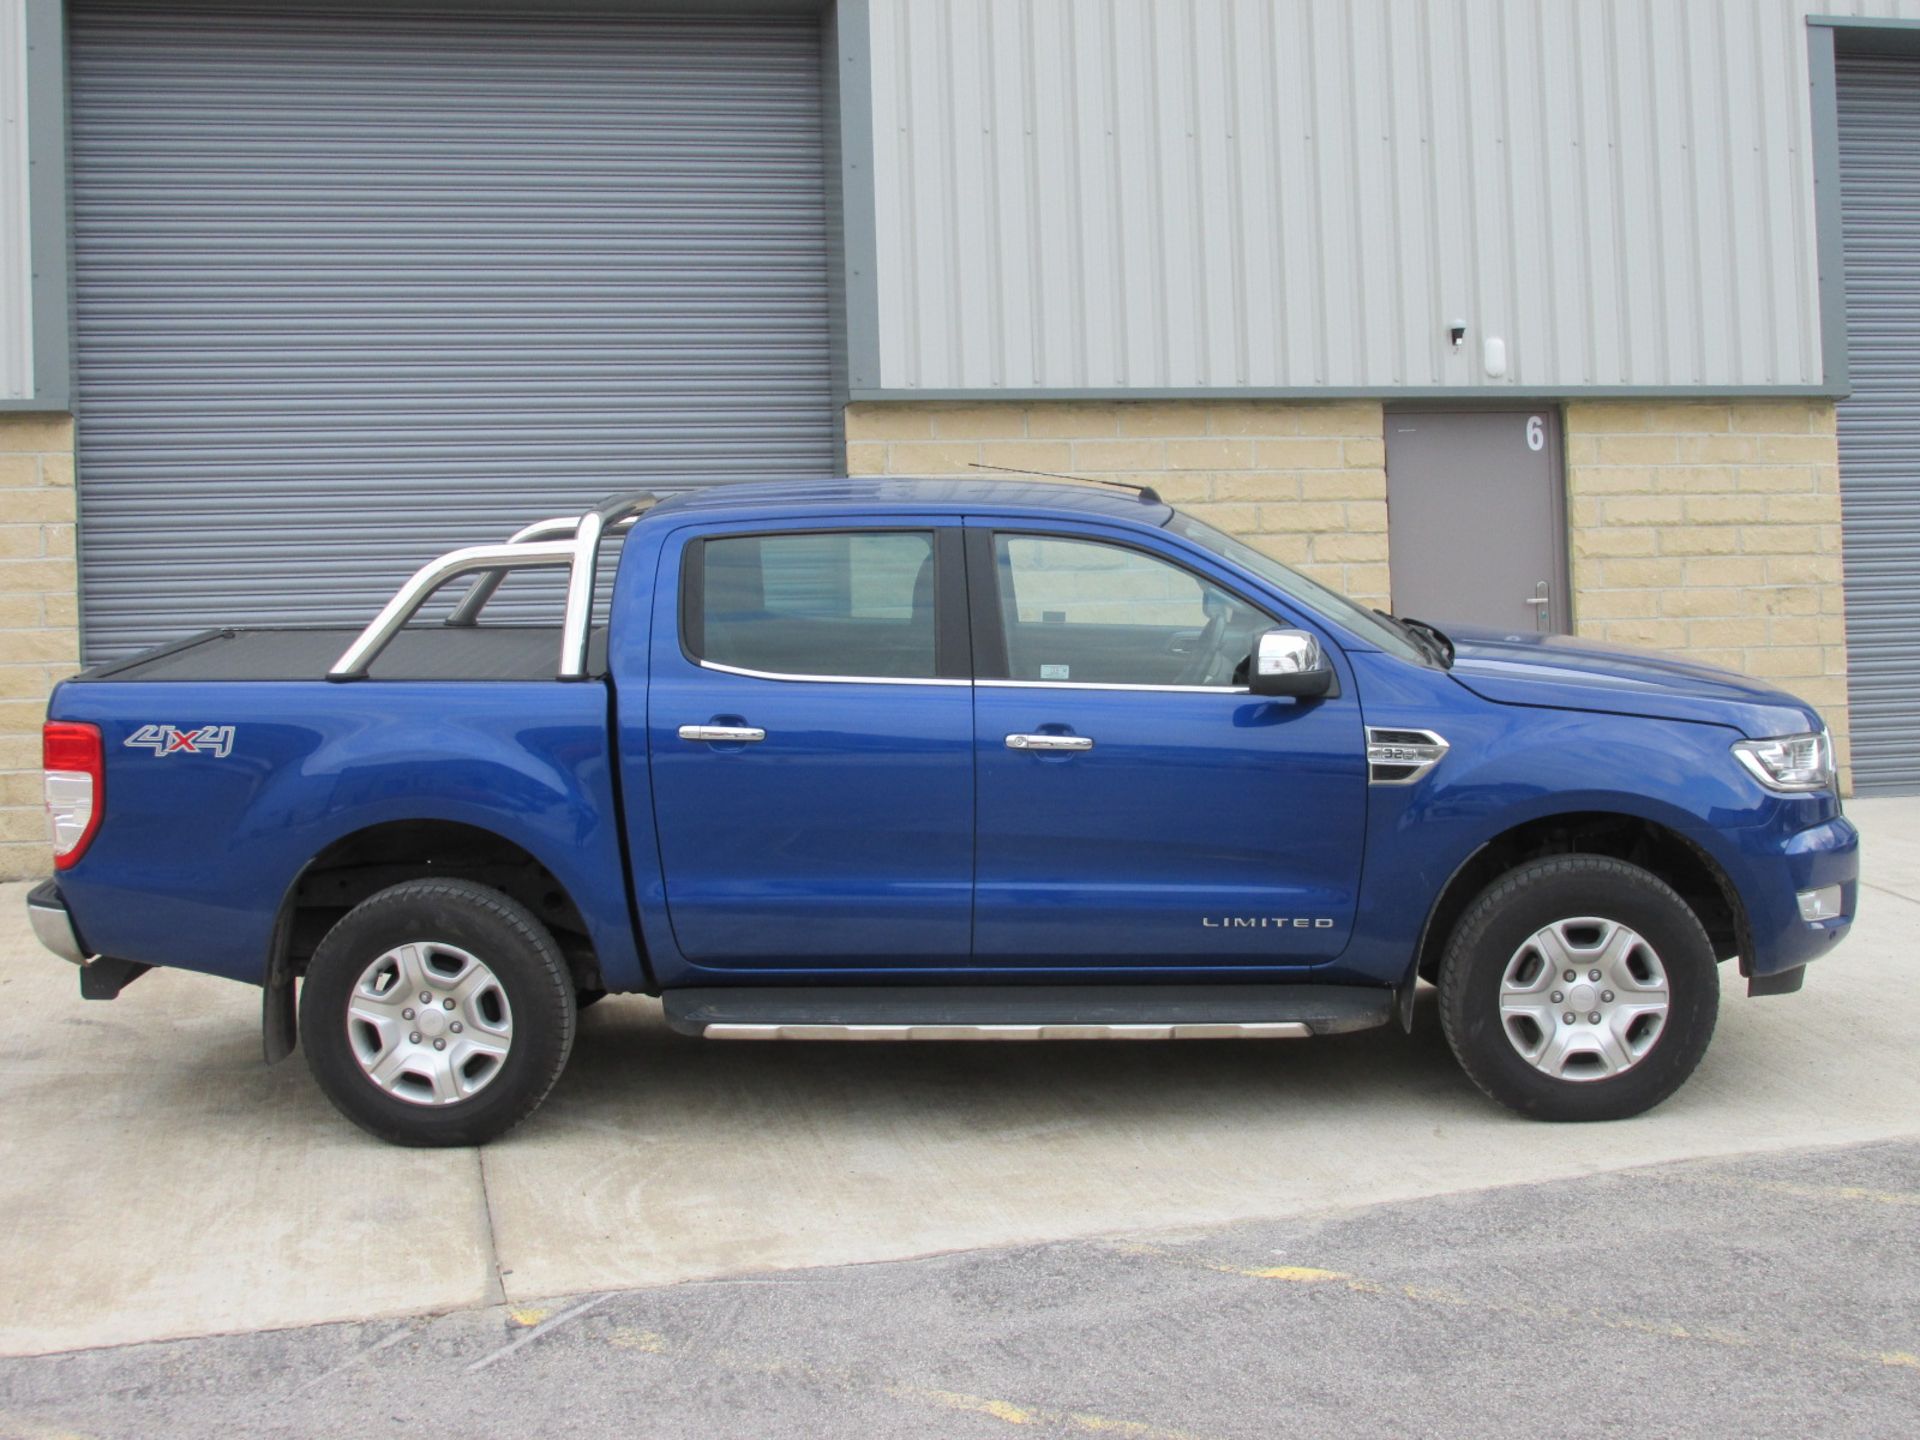 2017 FORD RANGER DIESEL Pick Up Double Cab Limited 2 3.2 TDCi 200 Auto (47774 miles) - Image 2 of 17